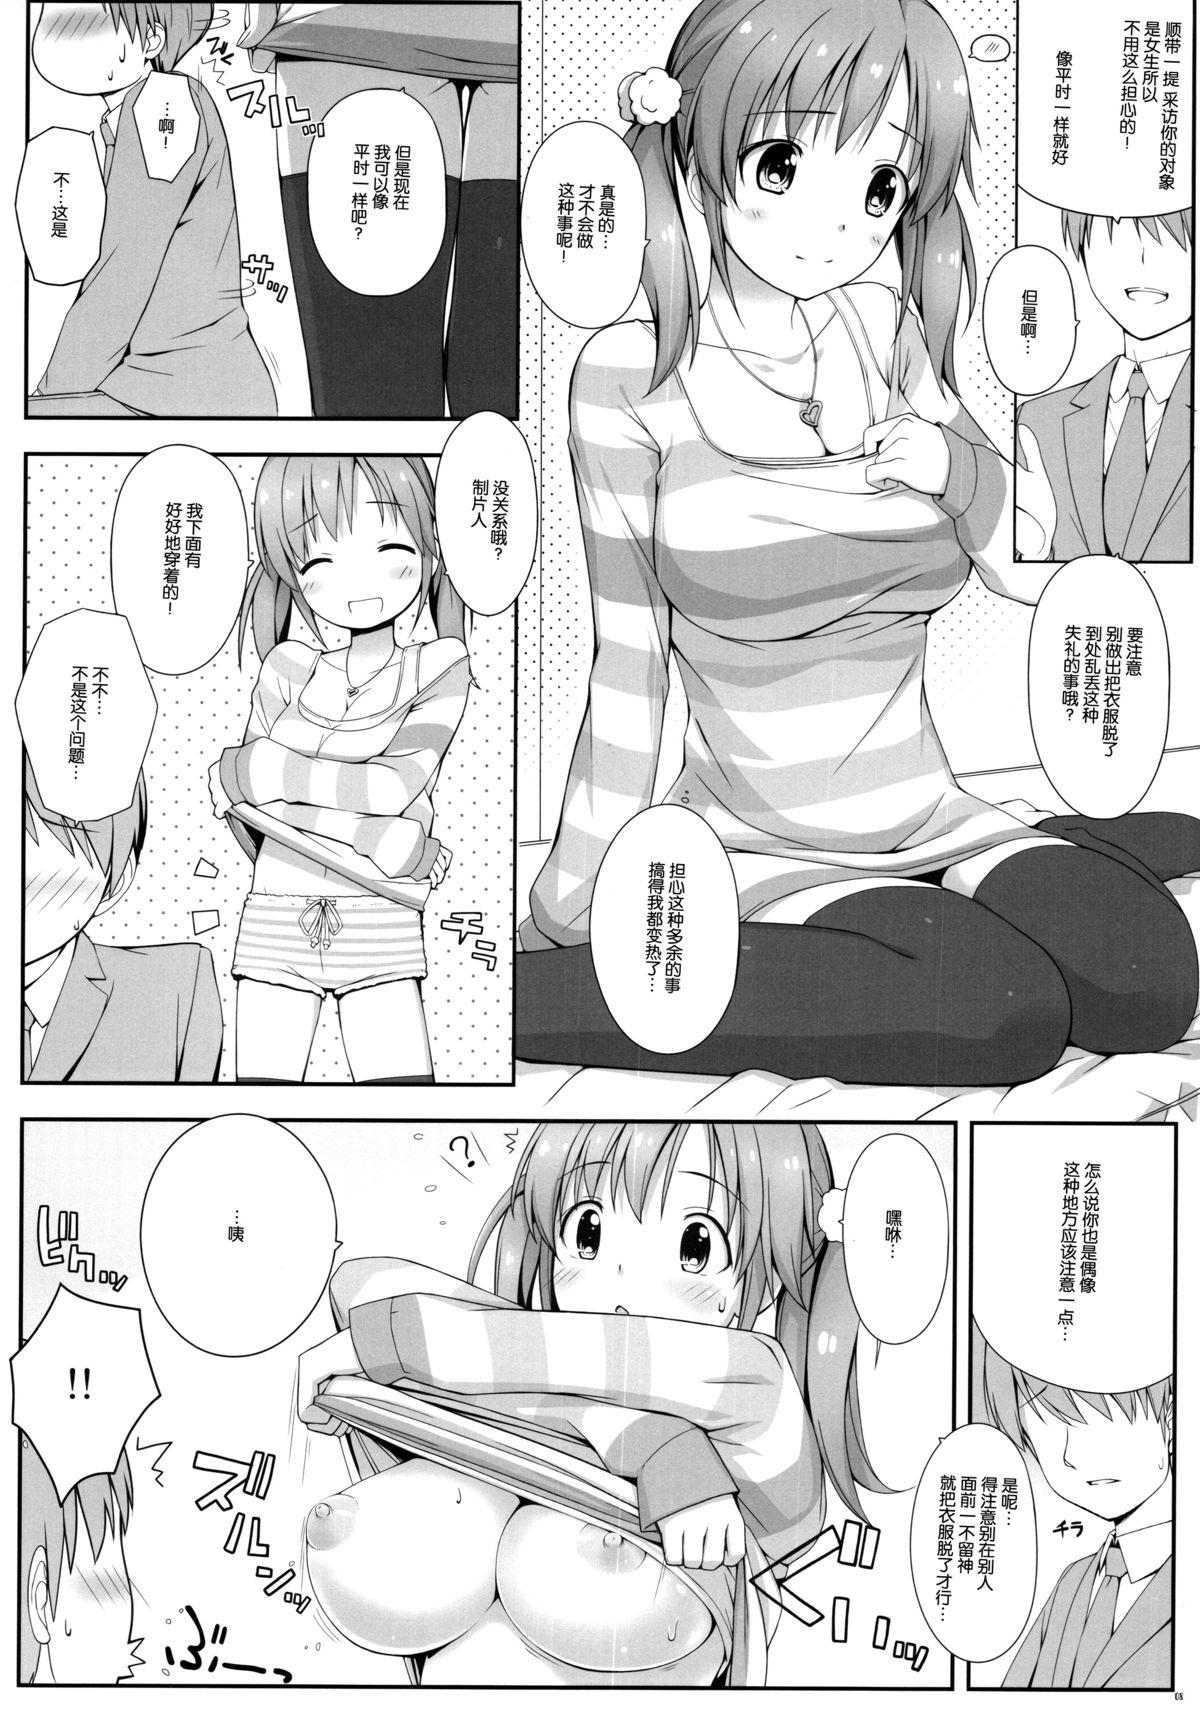 Anal BAD COMMUNICATION? 15 - The idolmaster Dykes - Page 9